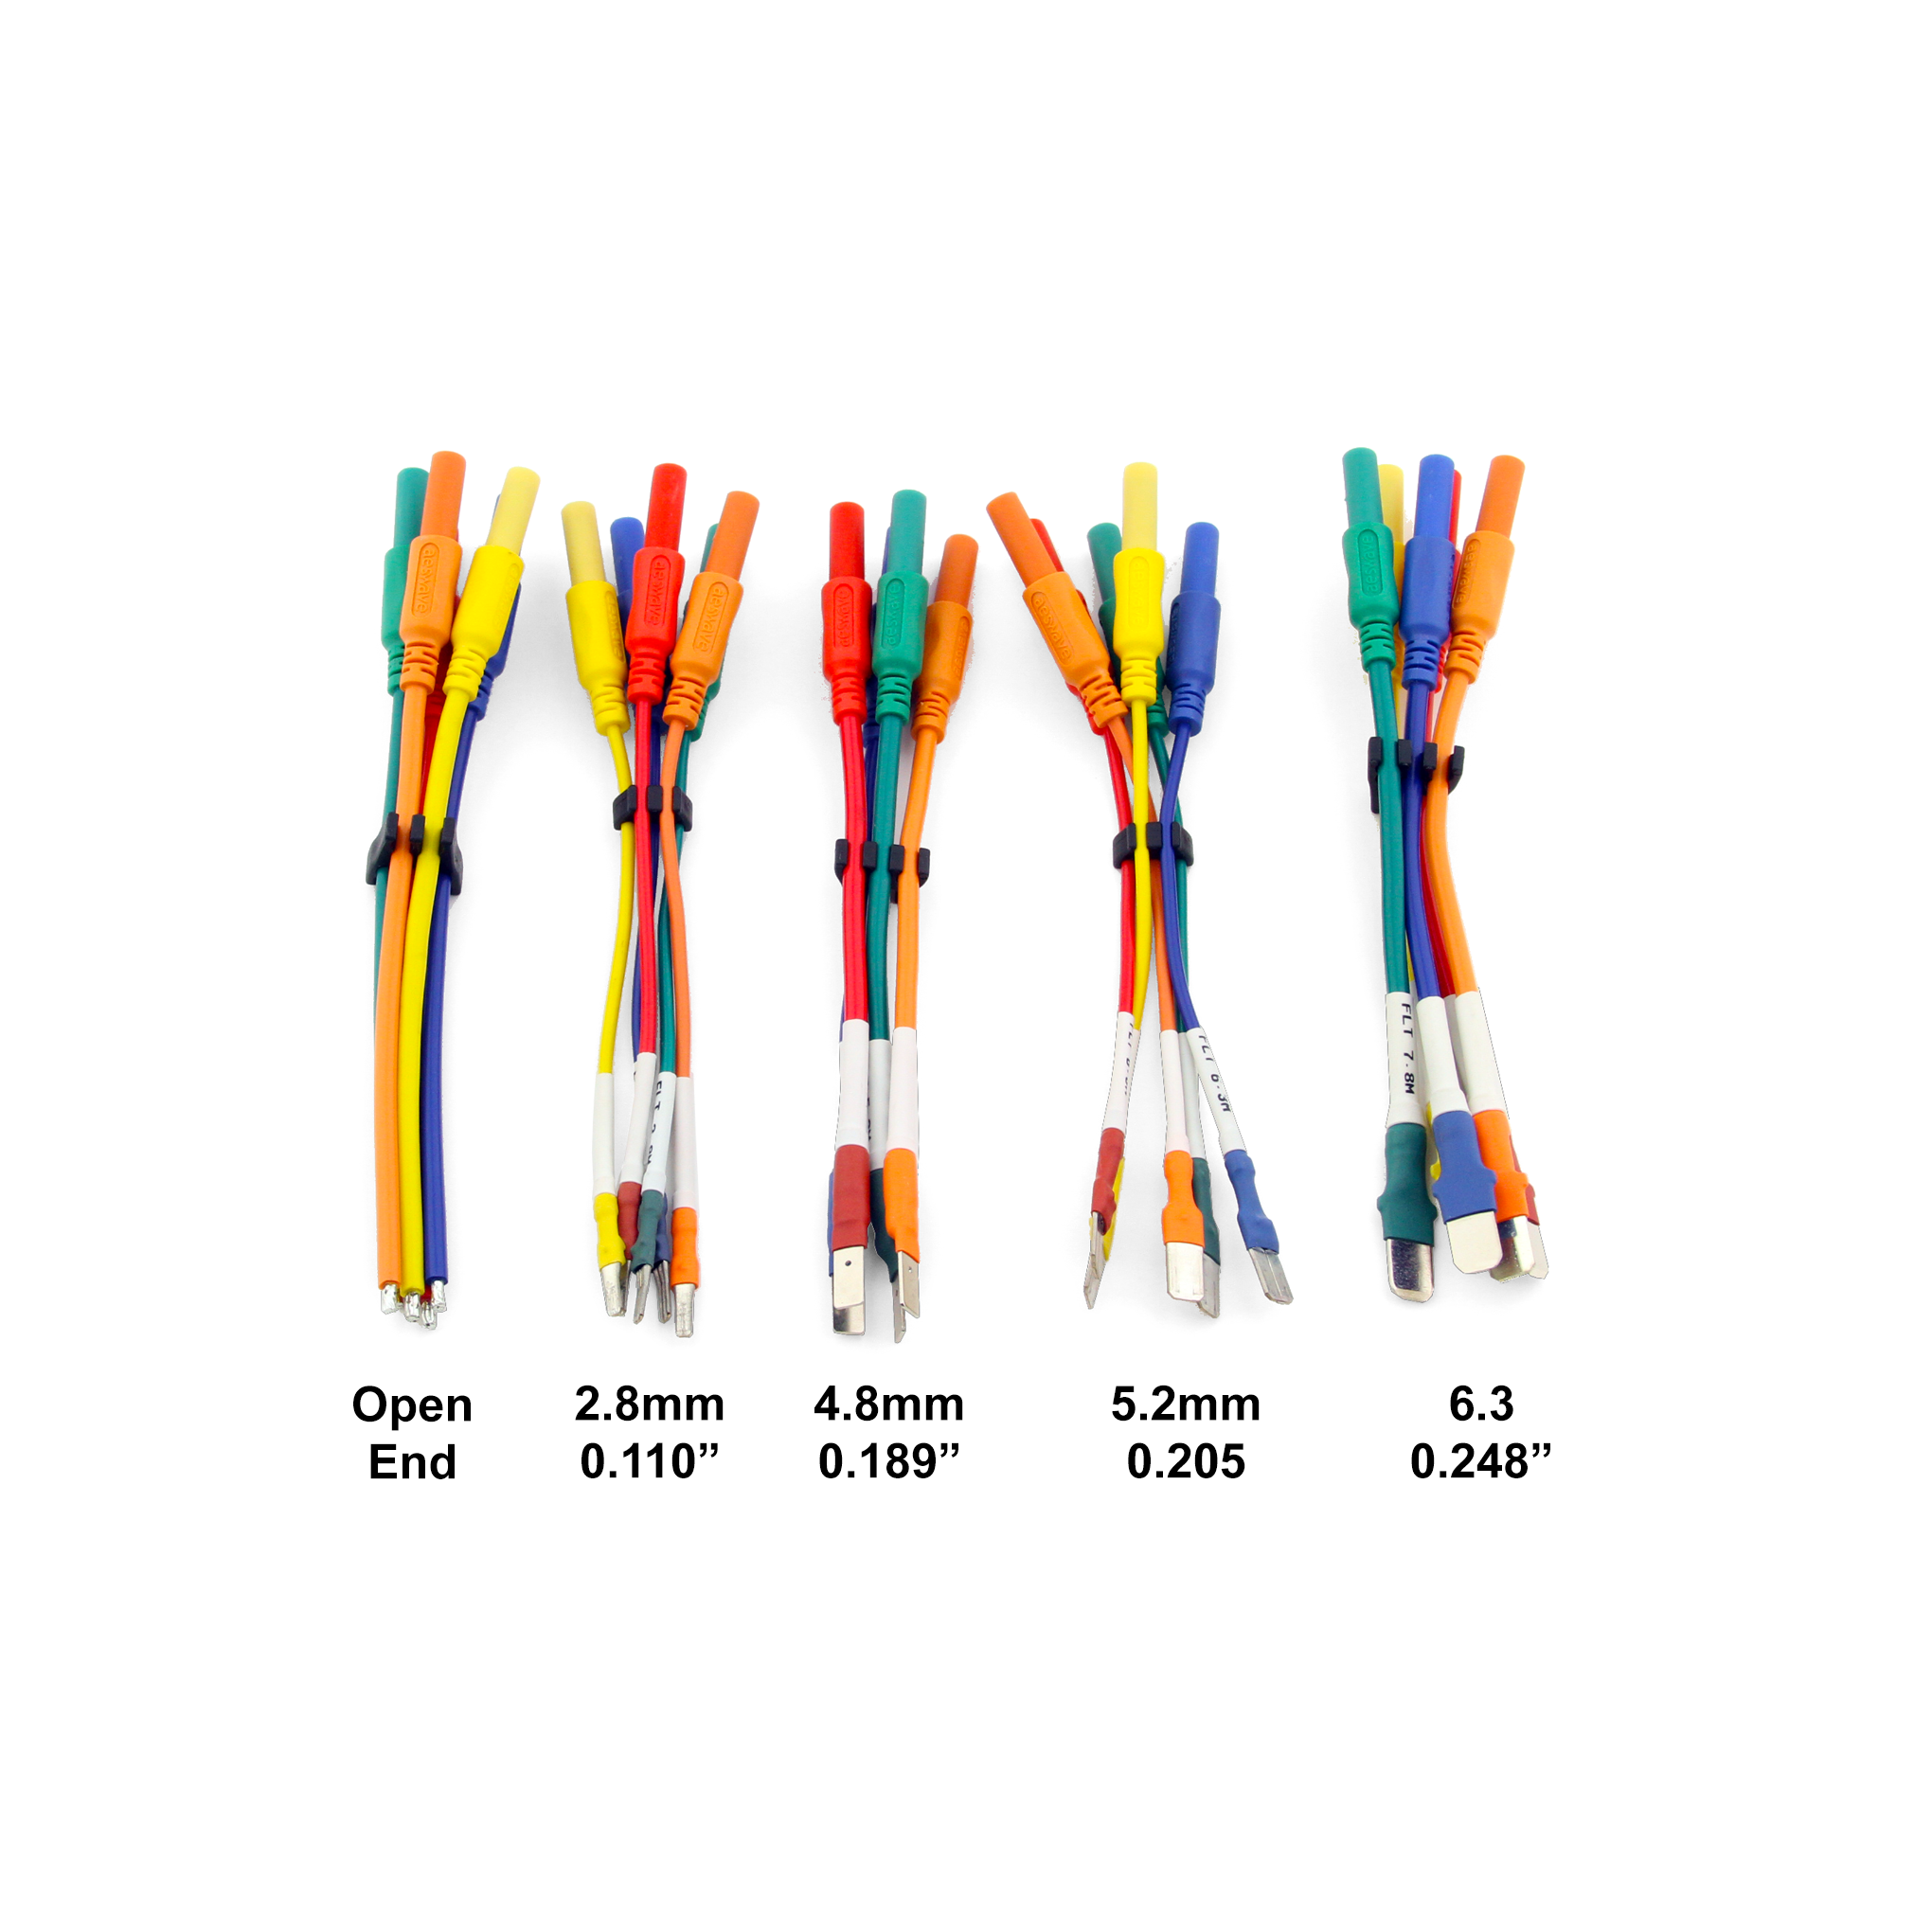 uActivate Universal Cable Terminal Leads